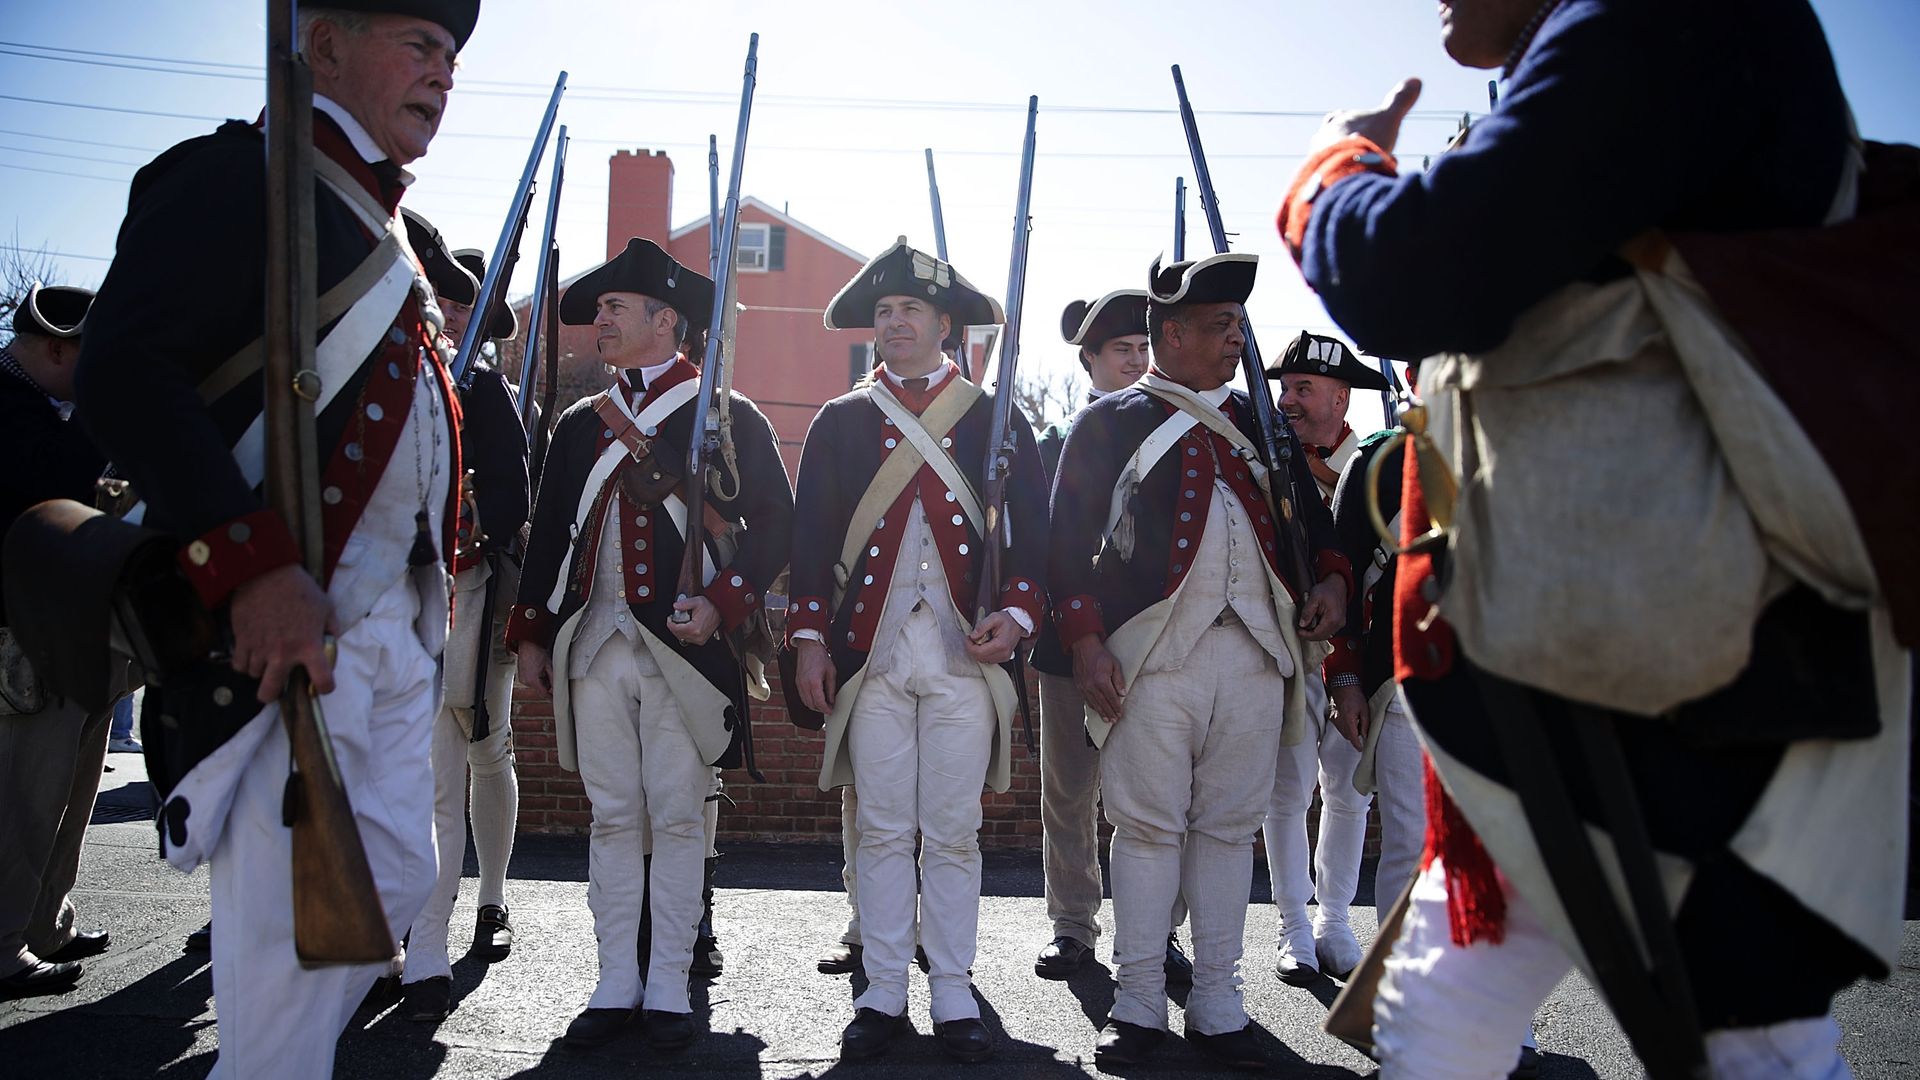 Members of the First Virginia Regiment, a Revolutionary War living history reenactment group, participate in the annual George Washington Birthday Parade February 20, 2017 in Old Town Alexandria, Virginia. 